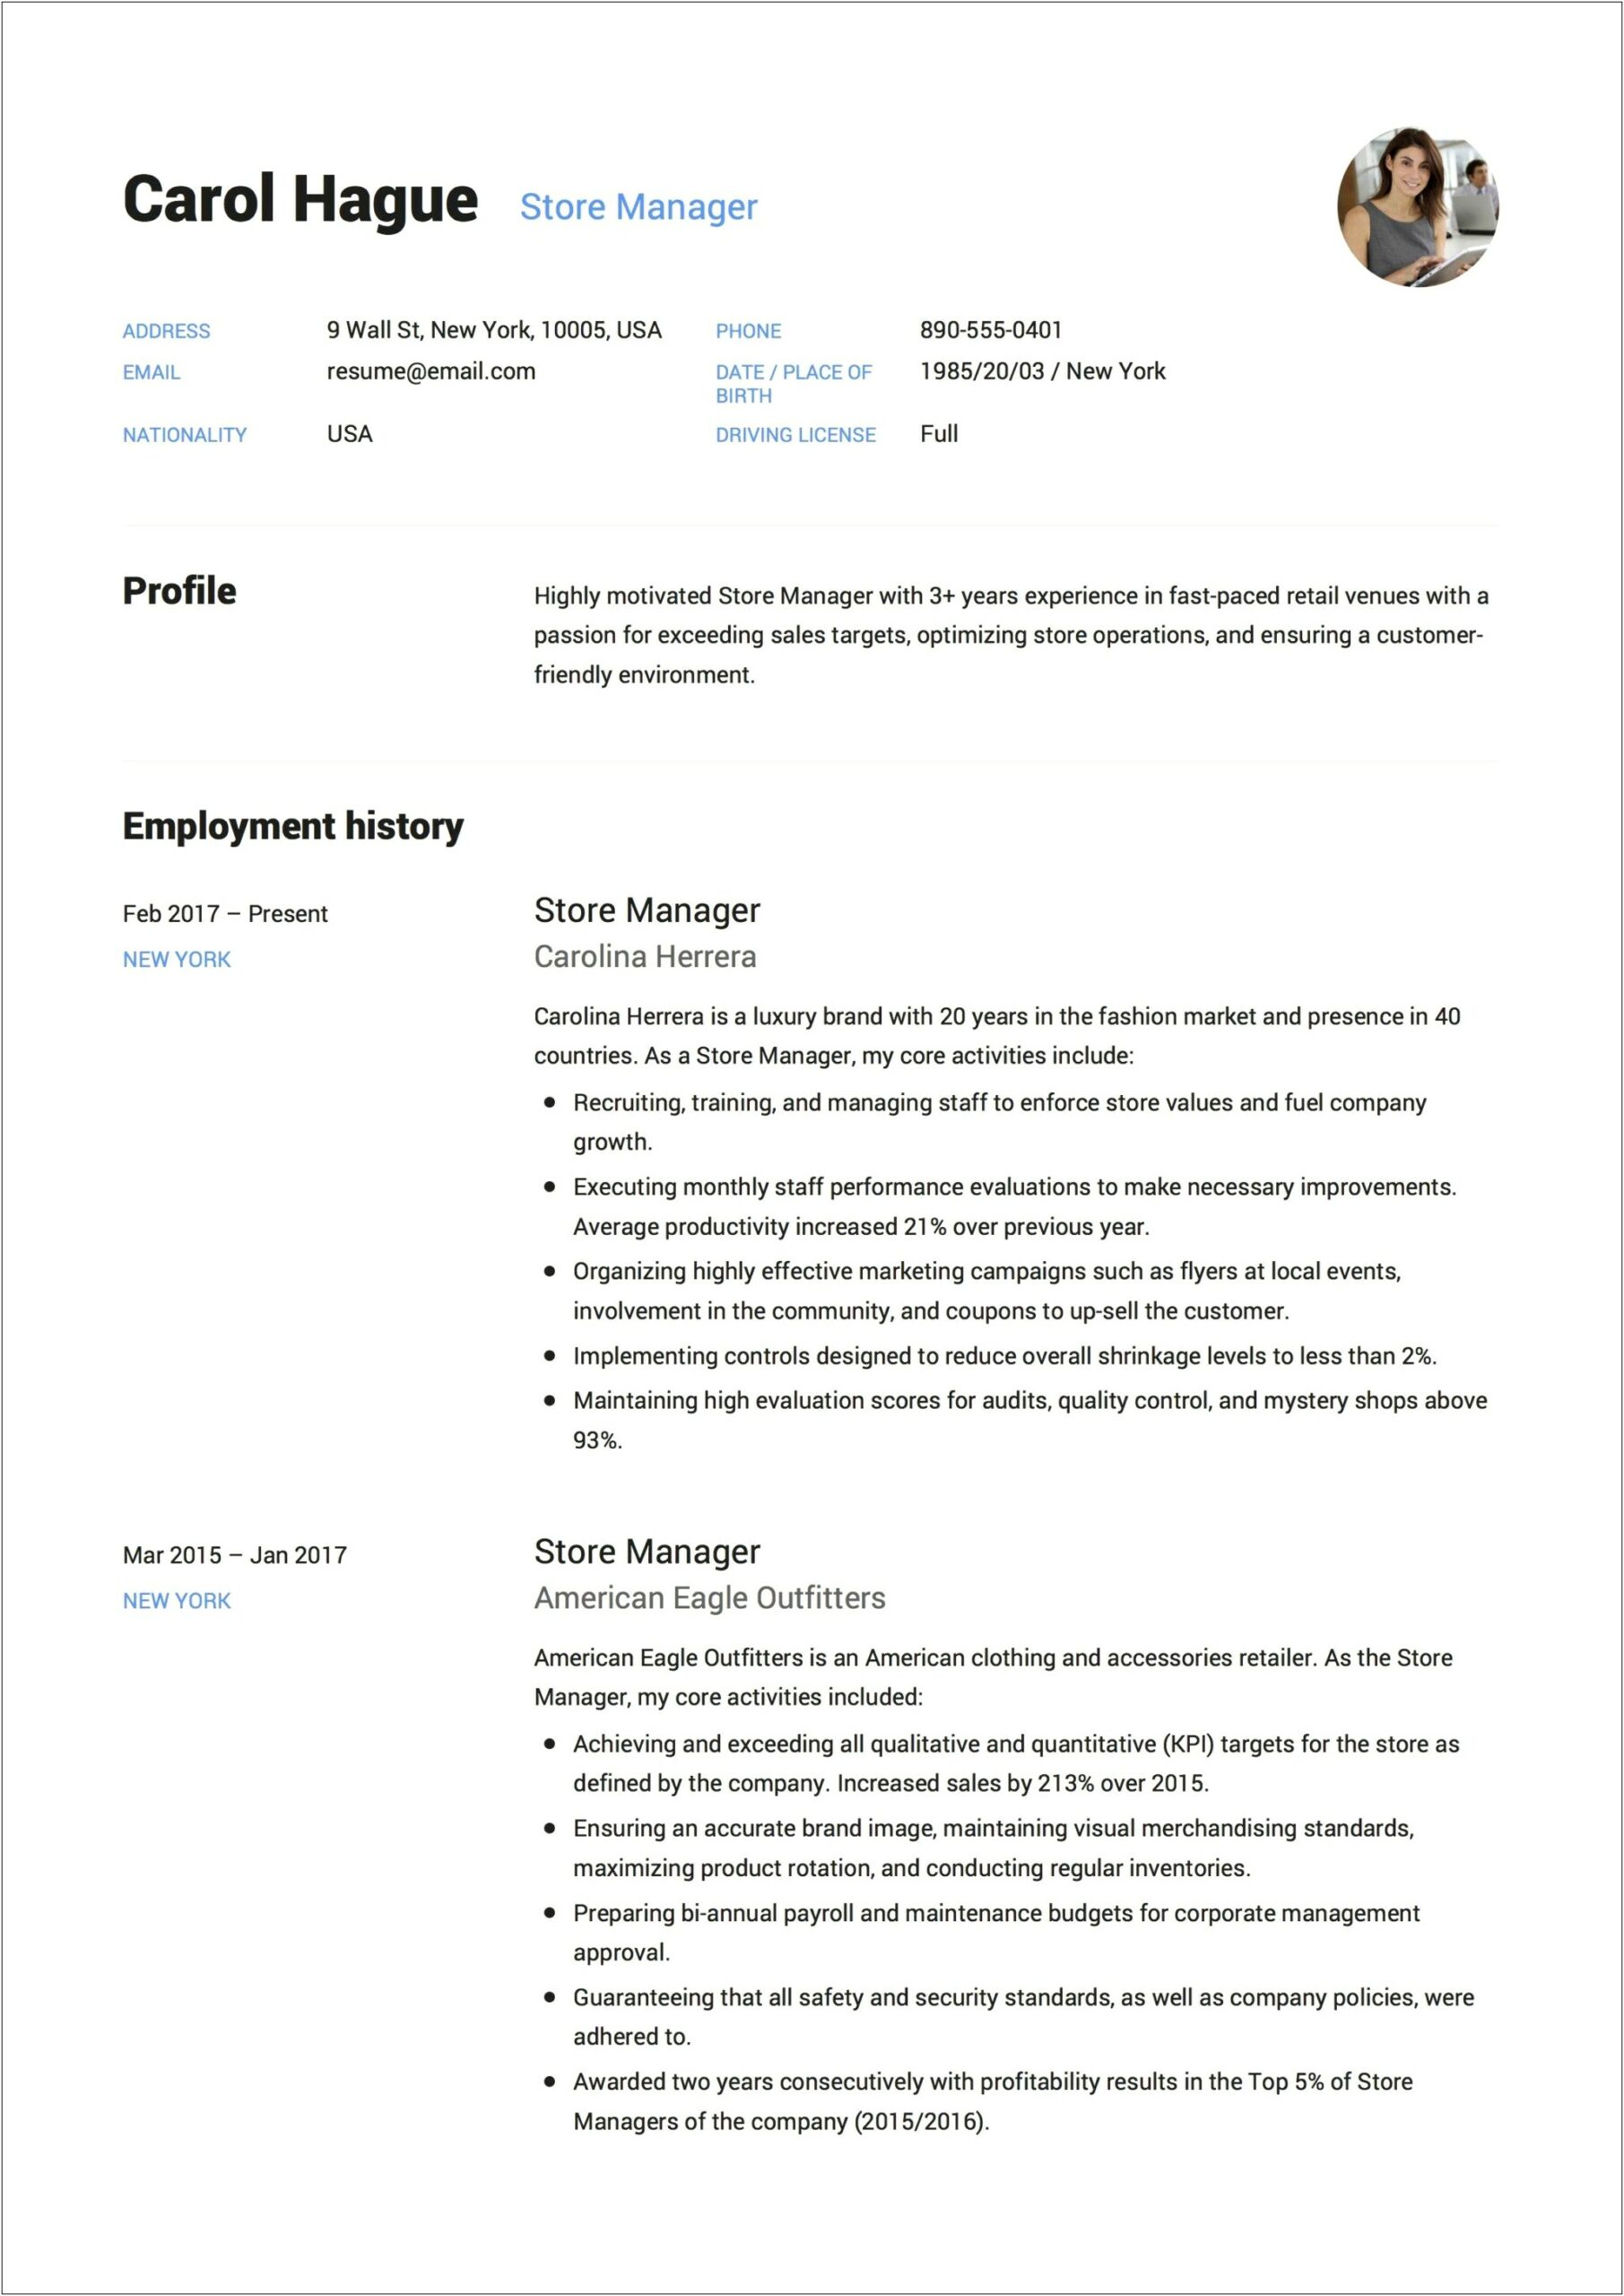 Resume Wording For Retail Management Experience